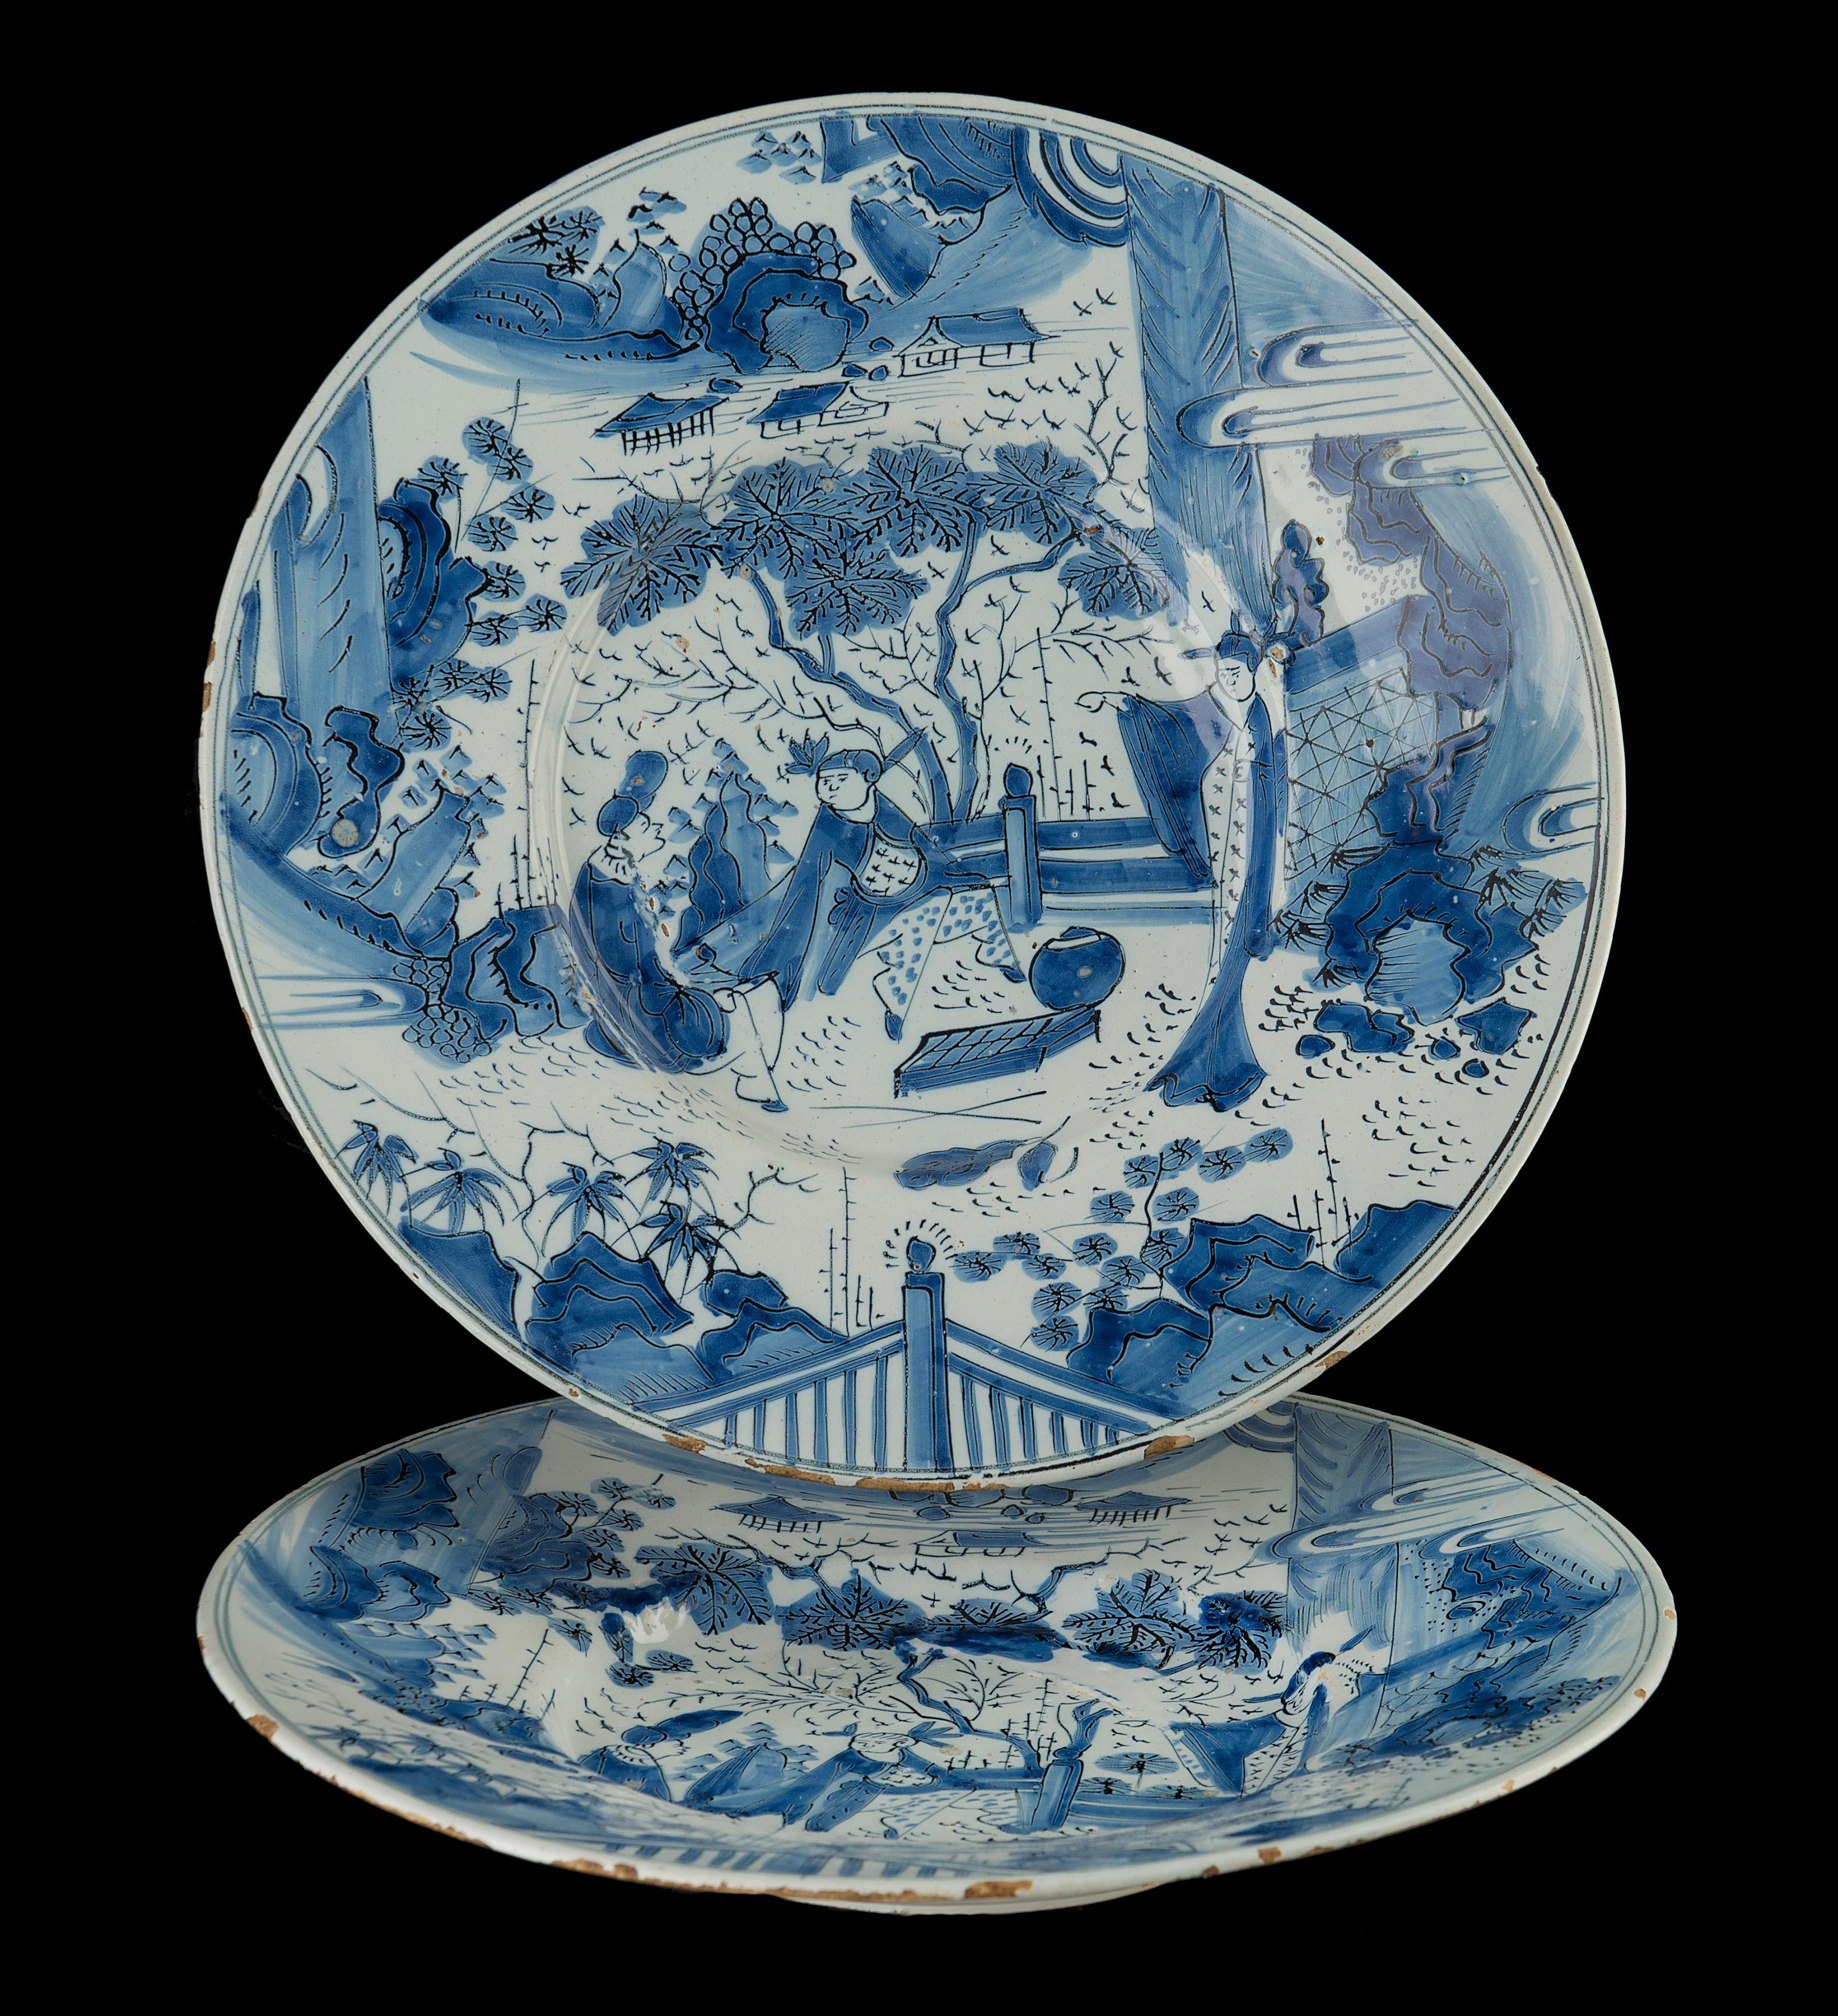 Pair of blue and white chinoiserie dishes. Delft 1680-1700.
[attributed to] The Three Porcelain Ash Barrels pottery 

Pair of blue and white dishes with a wide-spreading flange, the surface painted entirely with a blue and white chinoiserie